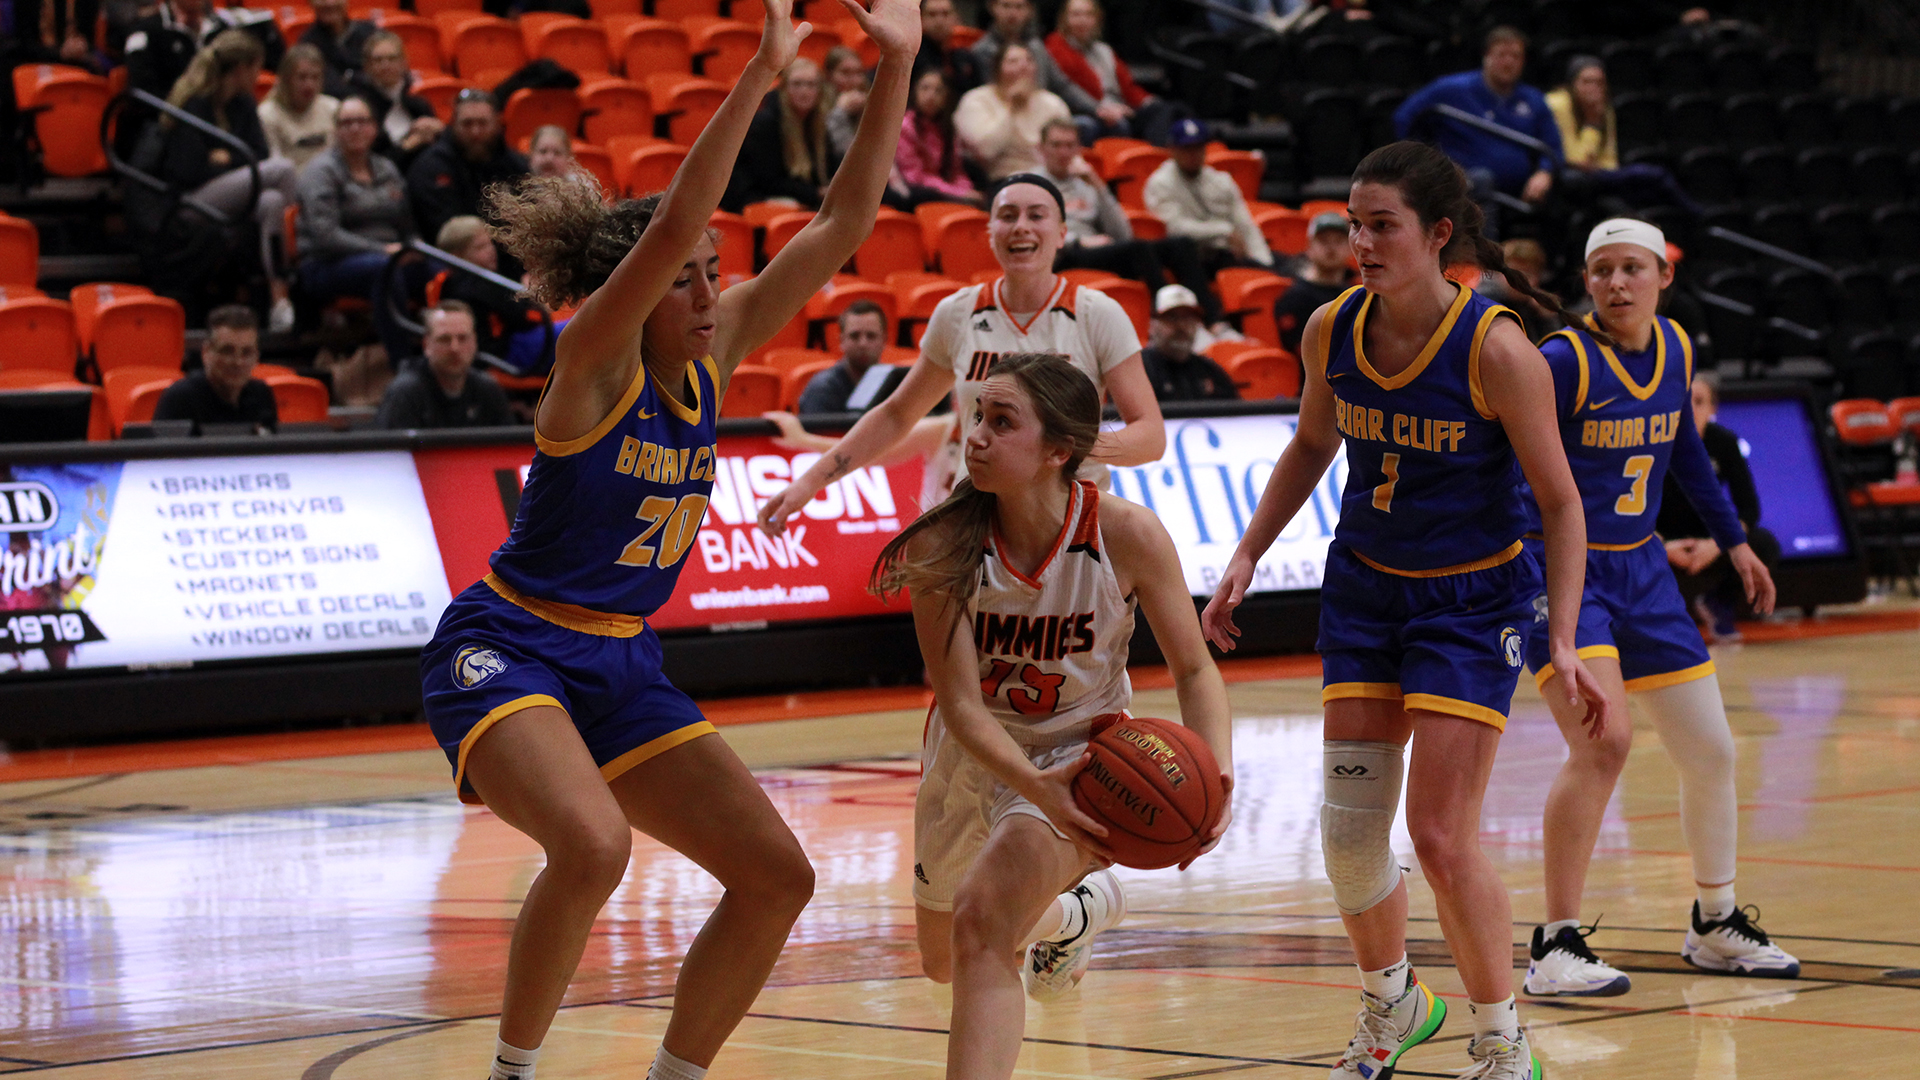 Jimmies nearly complete 19-point comeback against No. 23 Briar Cliff